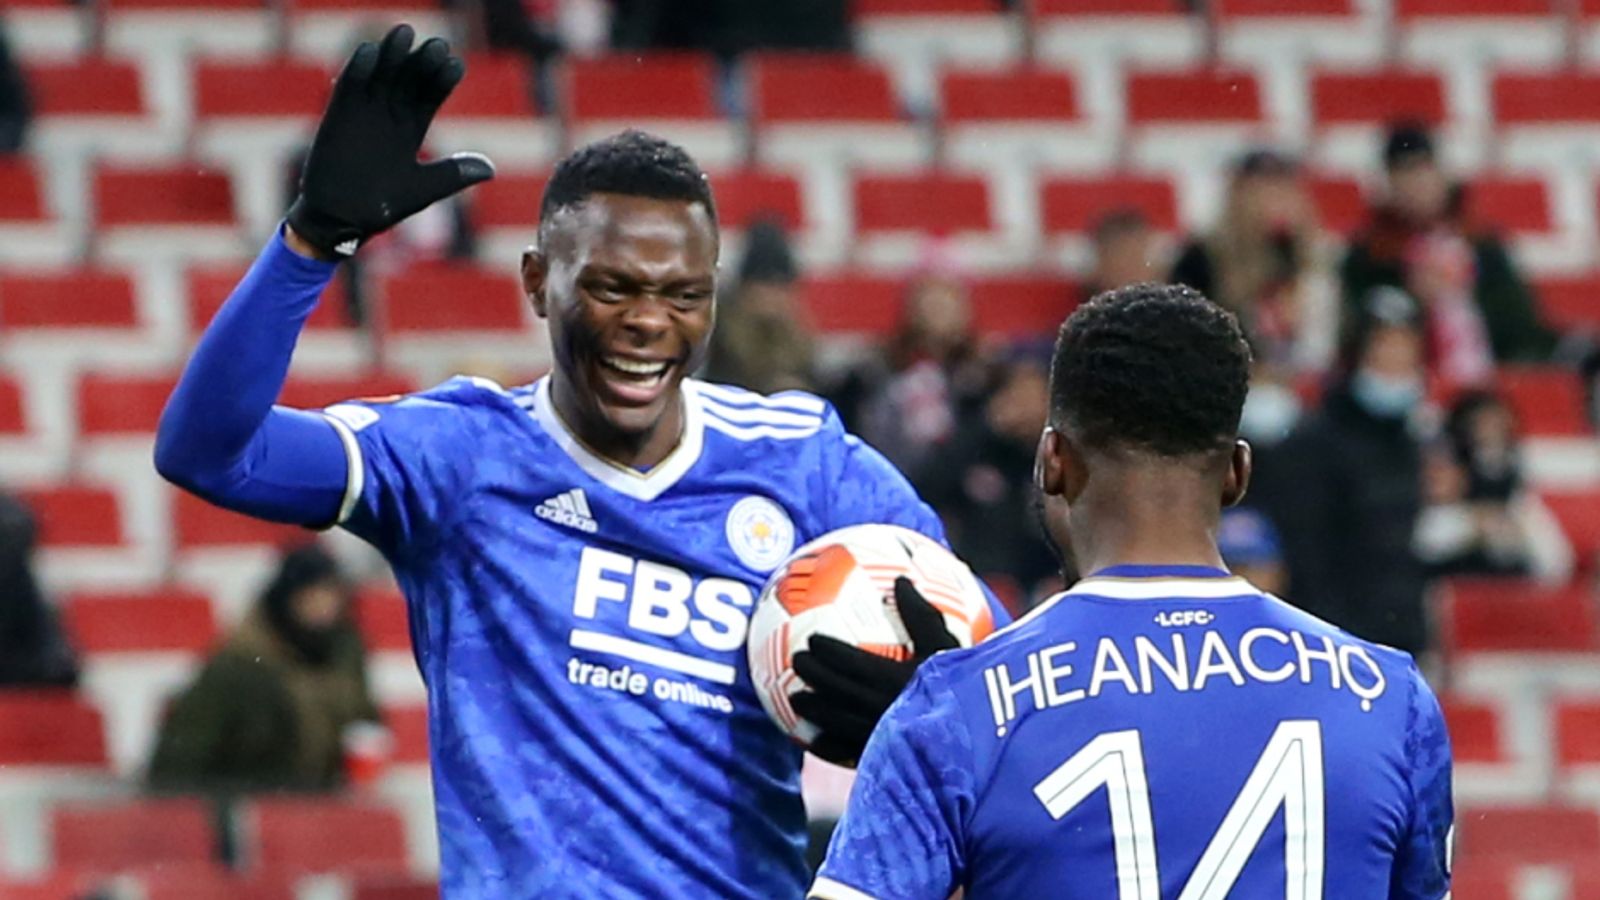 Patson Daka strikes four as Leicester roar back from brink at Spartak Moscow, Europa League